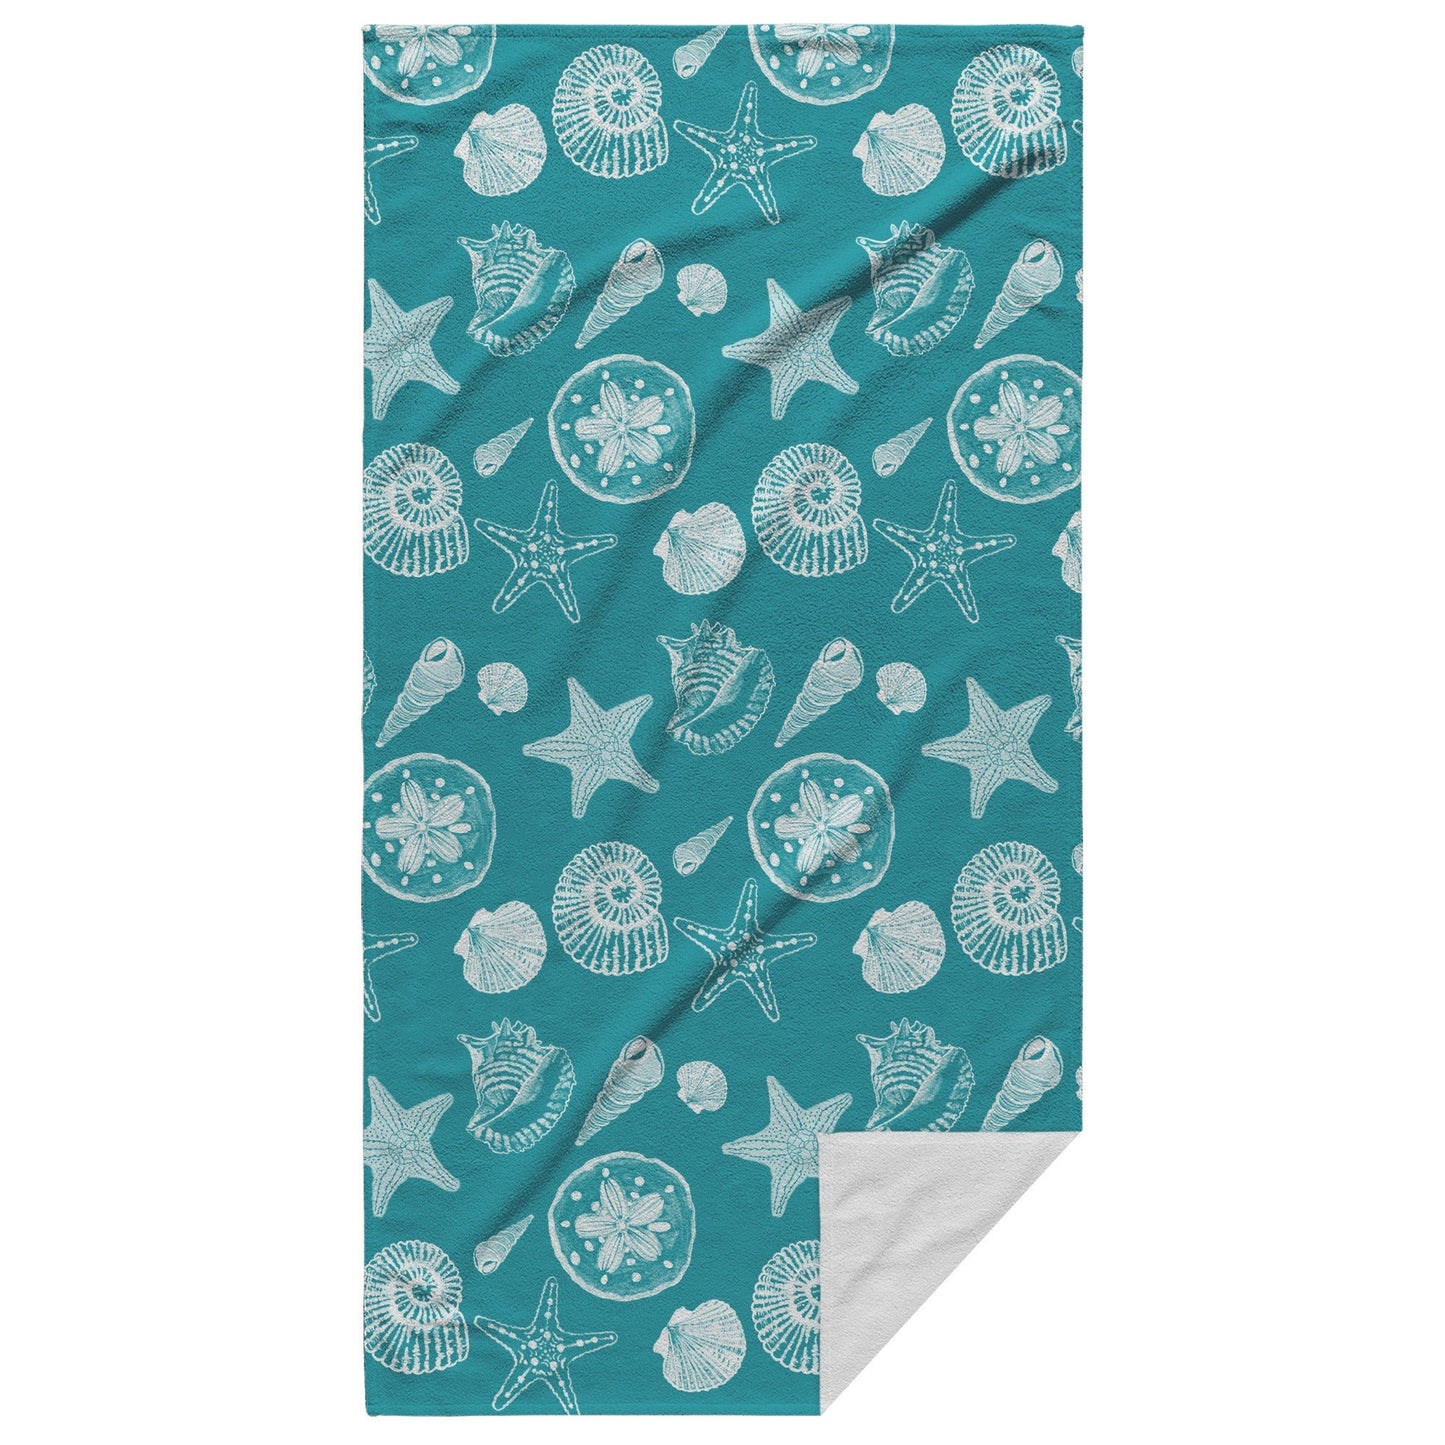 Seashell Sketches on Teal Background, Beach Towel